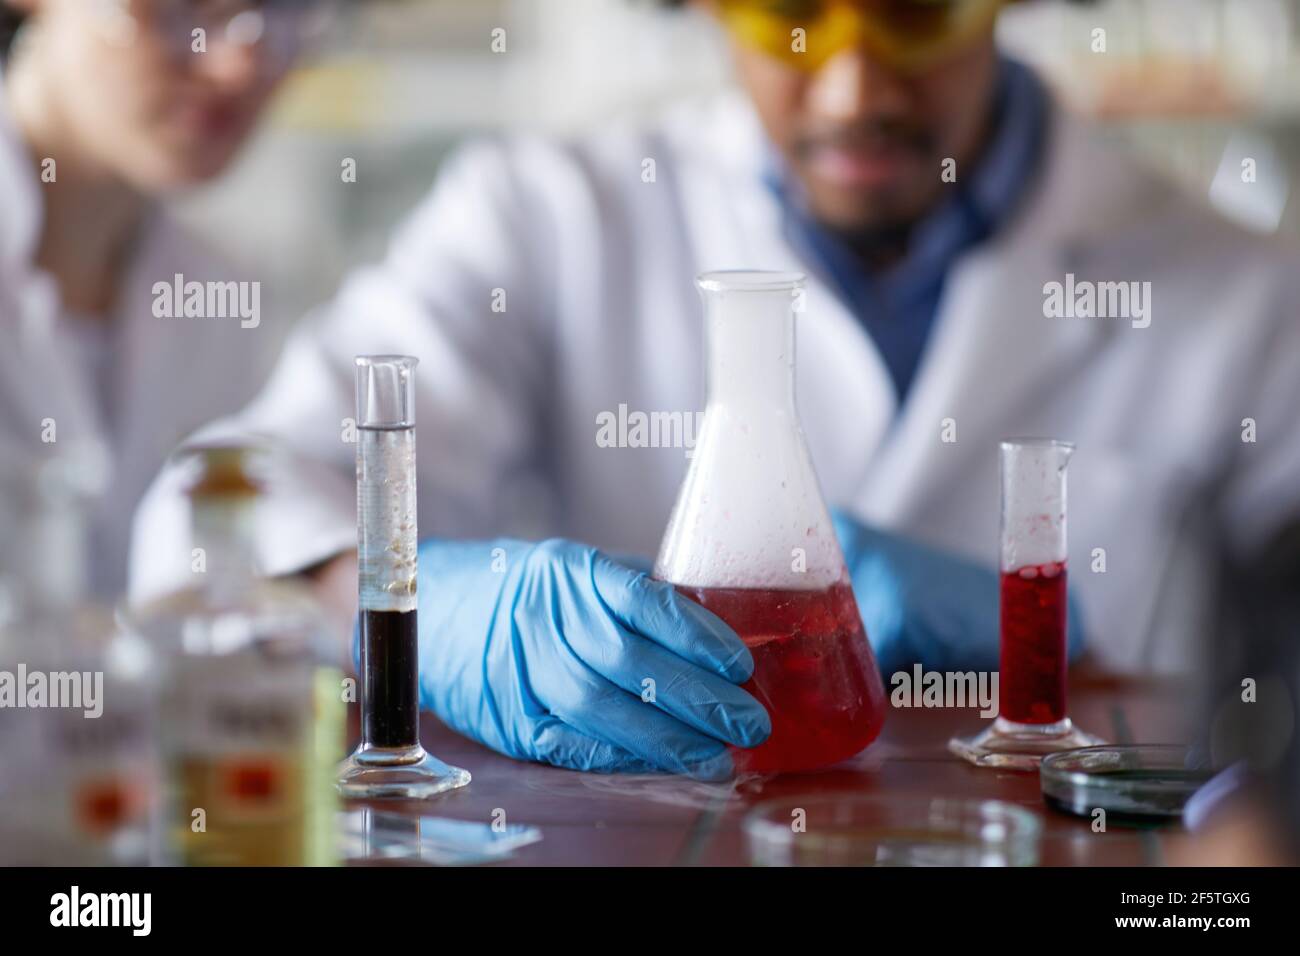 Young scientists in a protective gear observe chemicals in test tubes in the sterile laboratory environment. Science, chemistry, lab, people Stock Photo